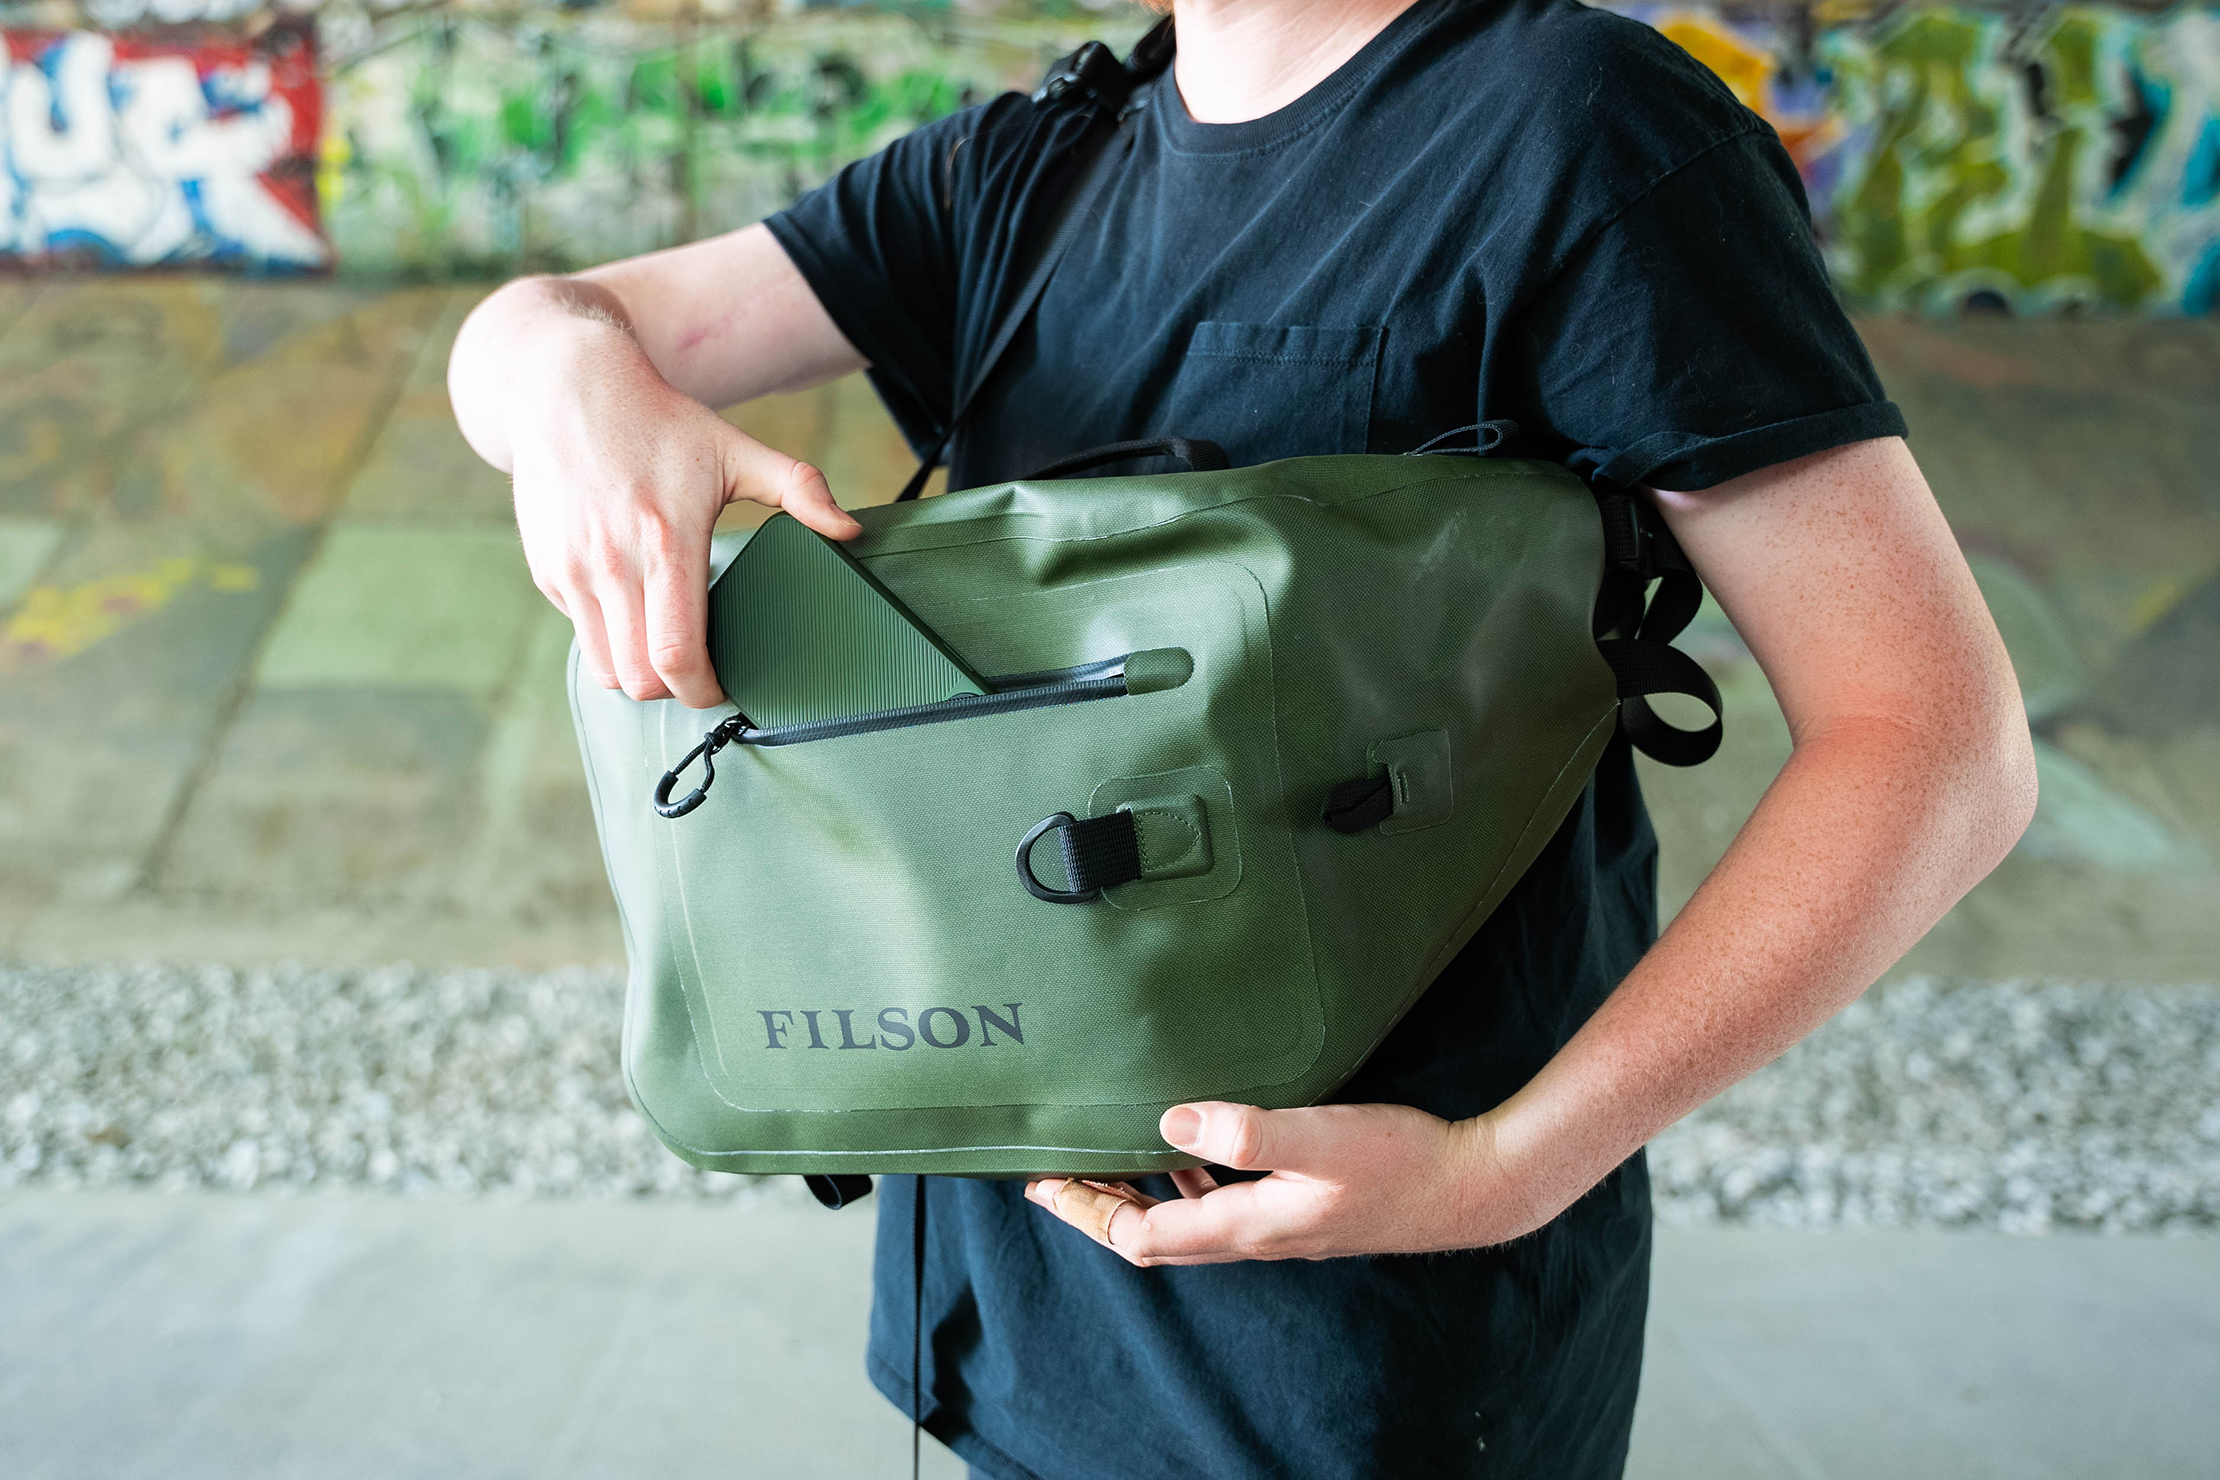 Filson Dry Sling Pack In Use 2